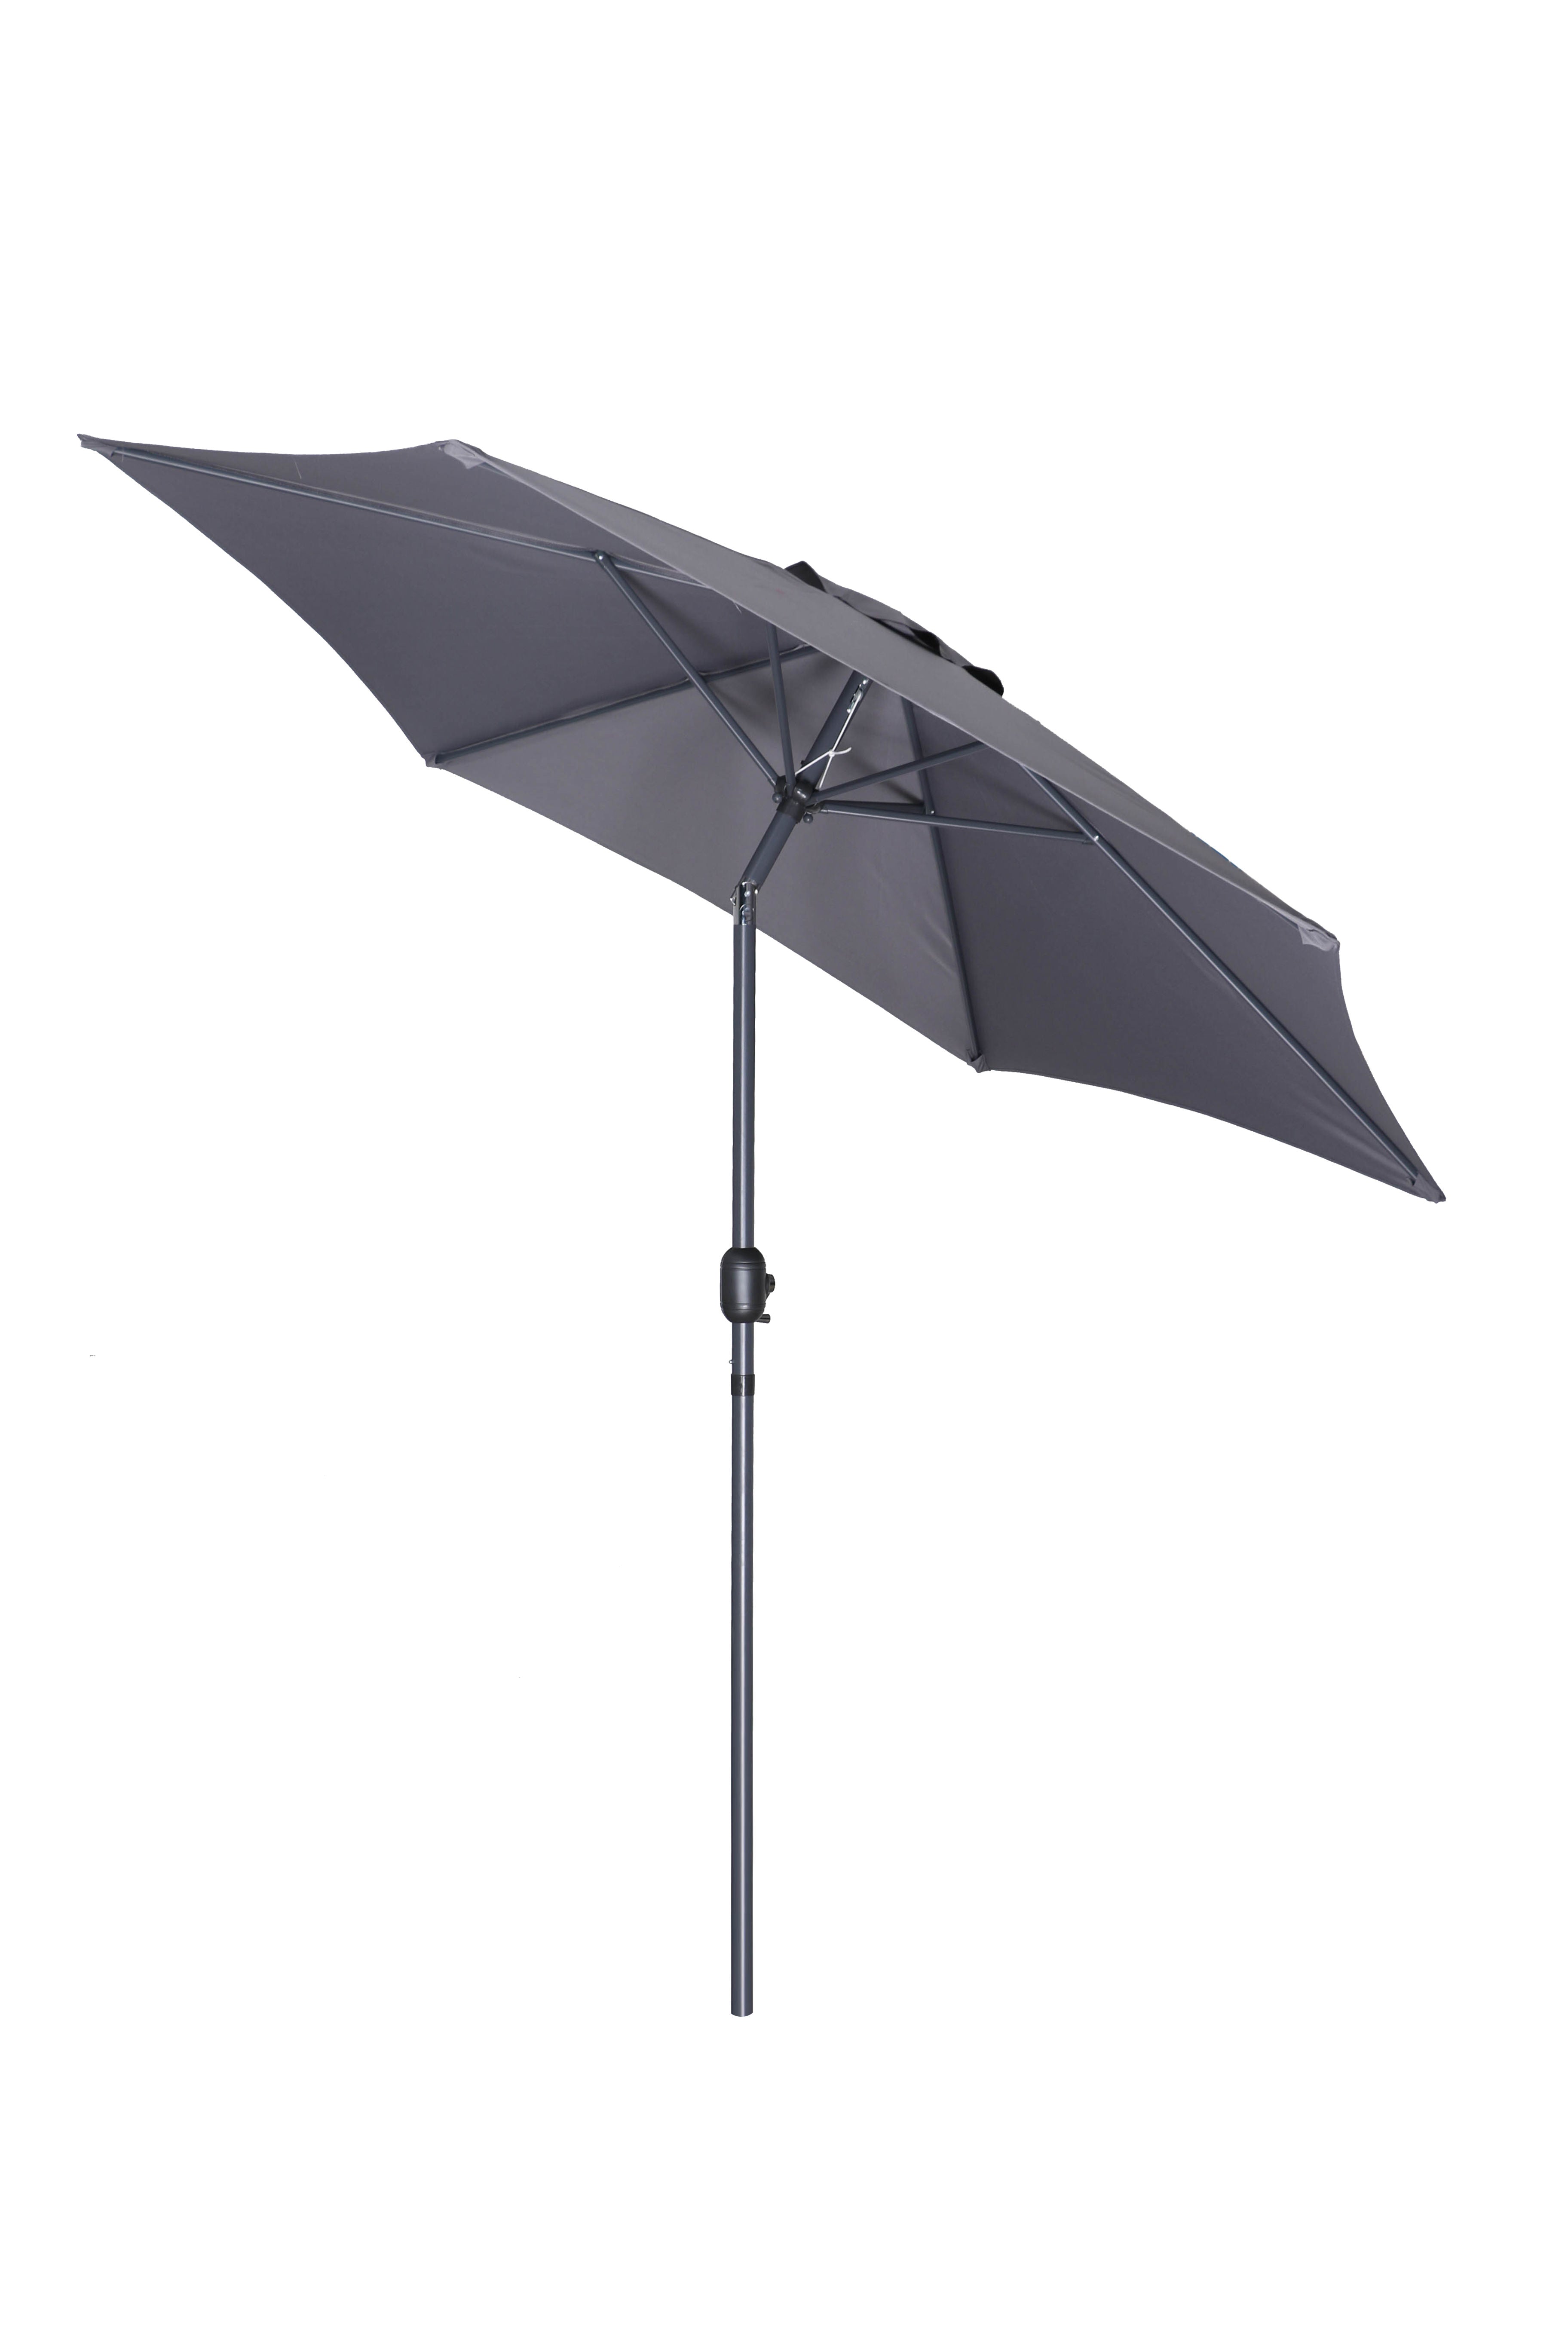 PatioZone 9' Tilting Market Umbrella (Cover Incl.) in UV-Protected Polyester (MOSS-T1204C) - Charcoal